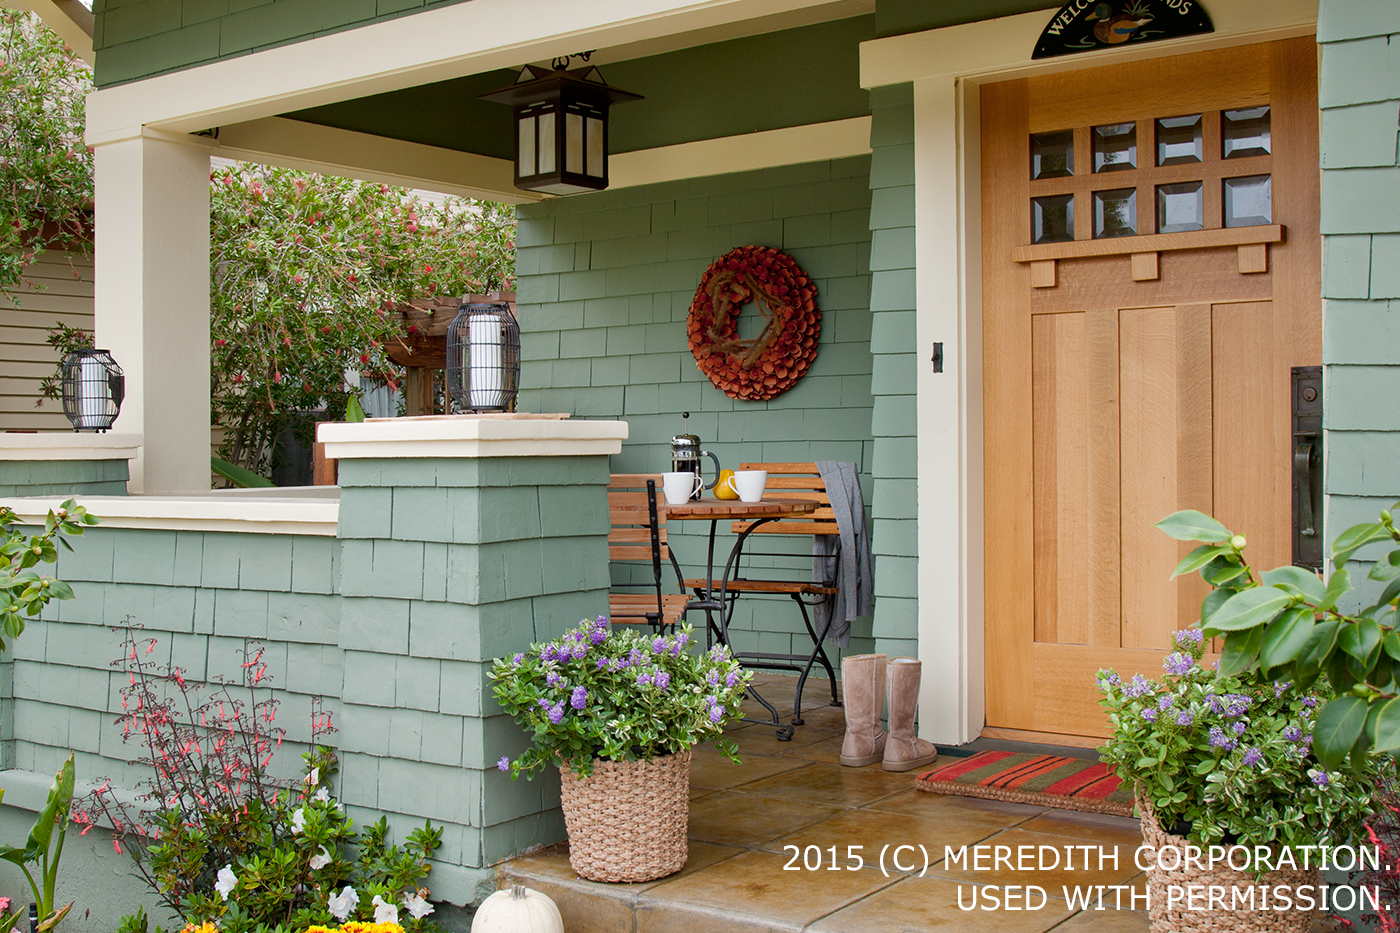 Inviting Exterior Doors & Front-Yard Landscaping - bhgrelife.com